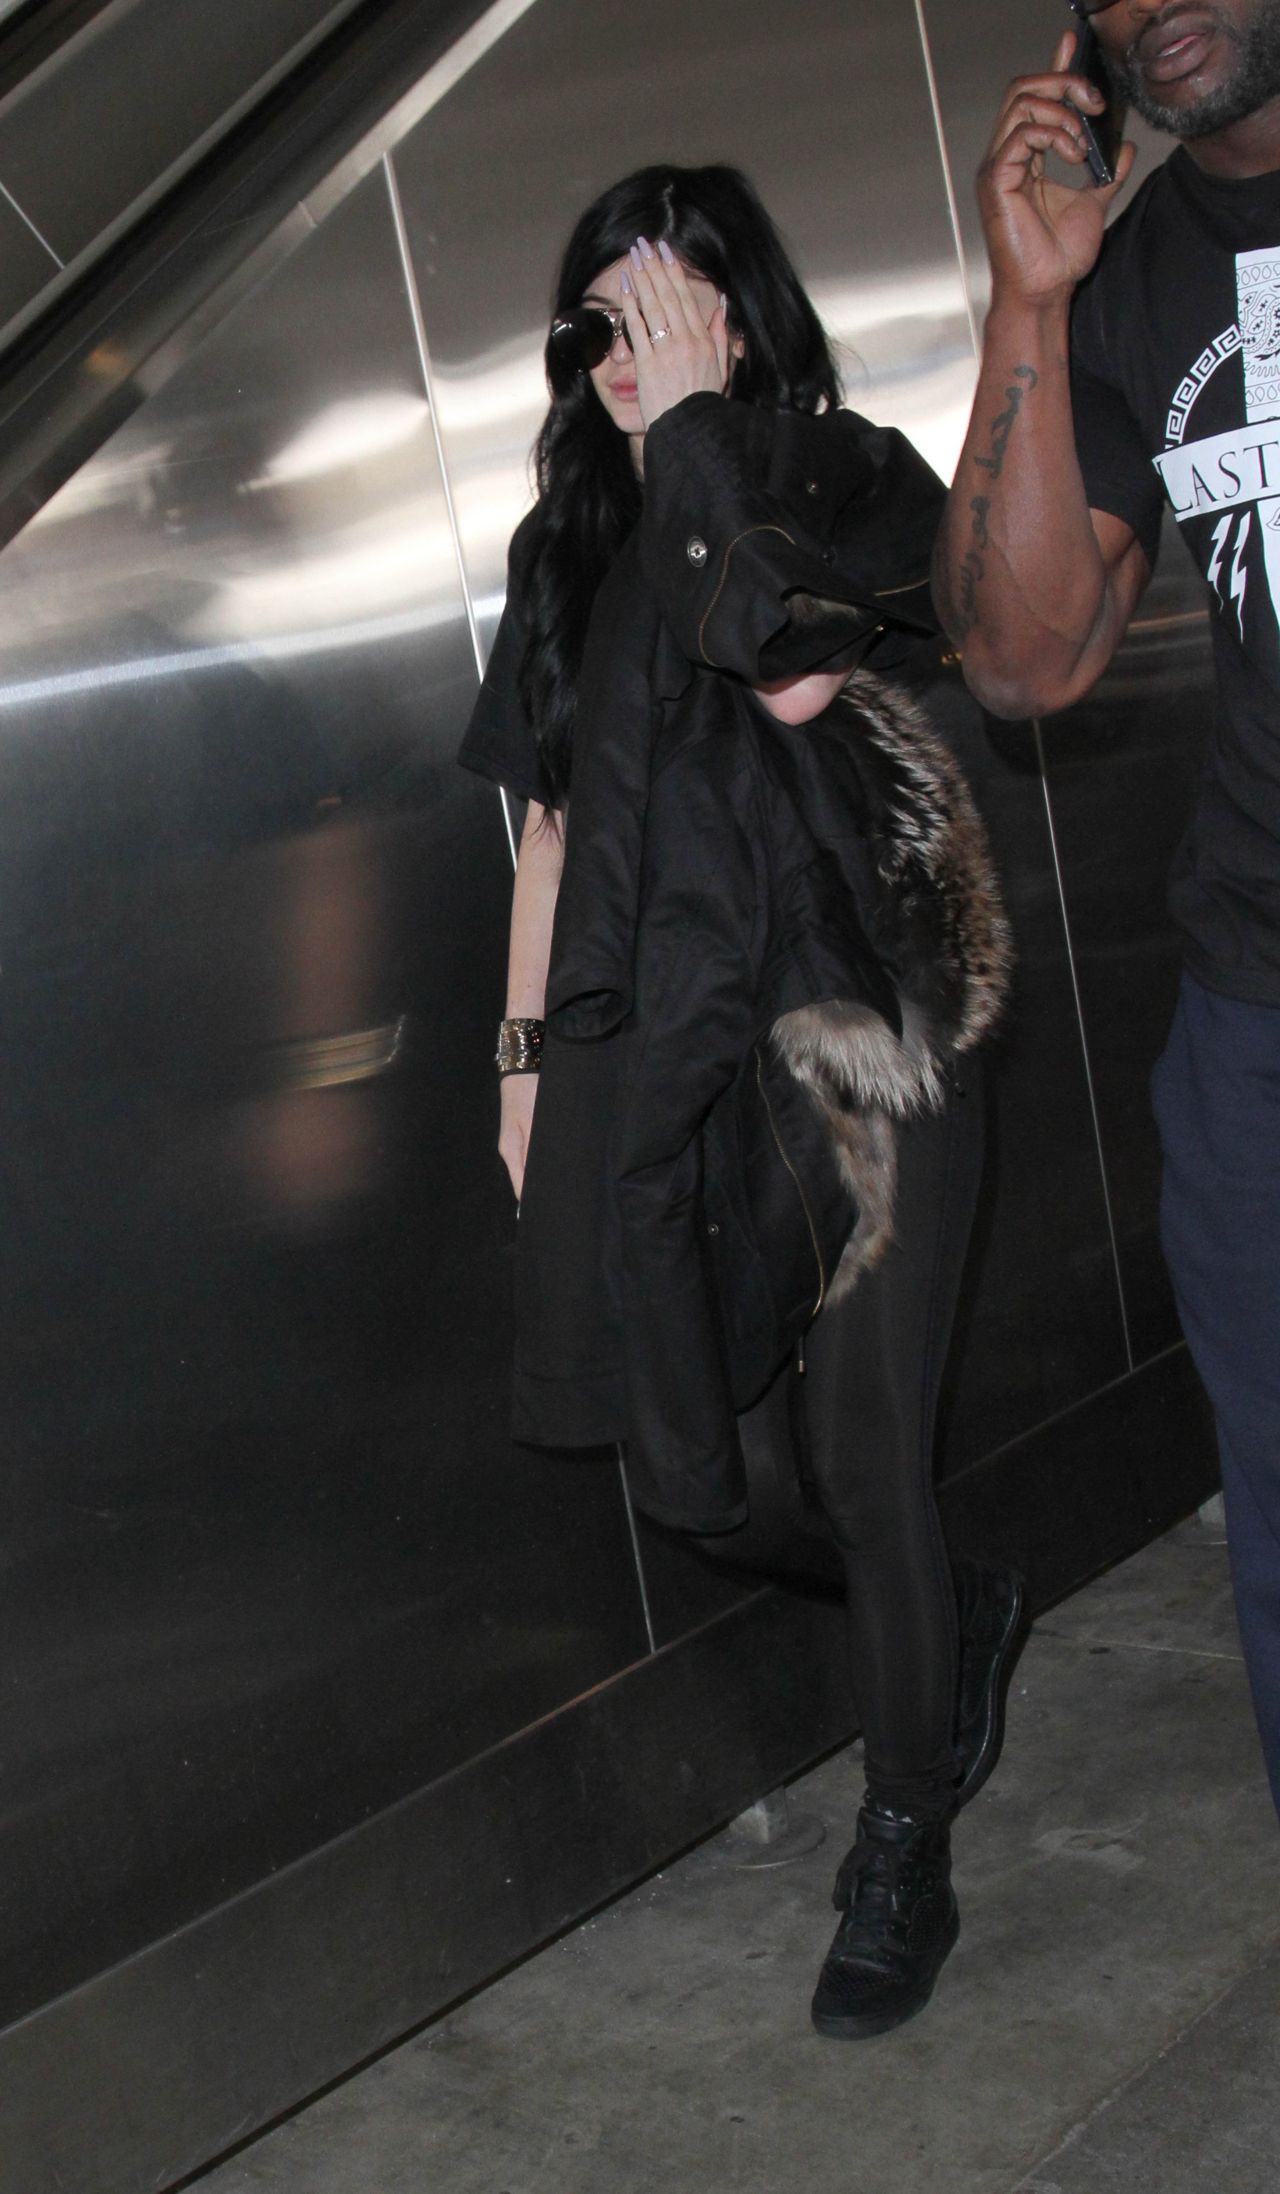 kylie-jenner-at-lax-airport-march-2015_8.jpg